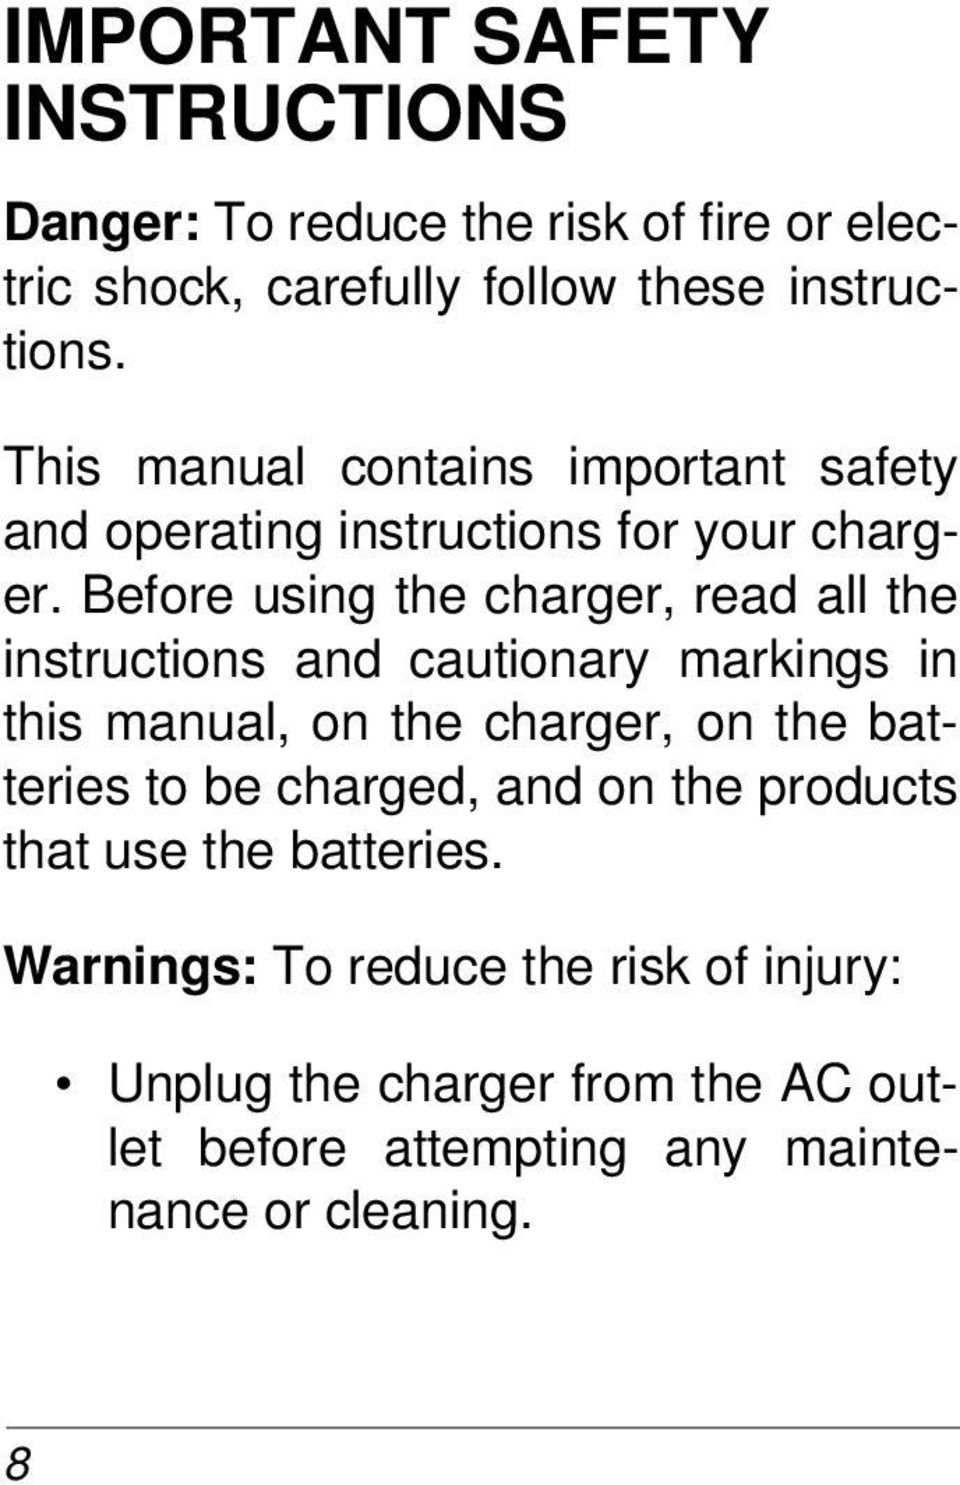 Before using the charger, read all the instructions and cautionary markings in this manual, on the charger, on the batteries to